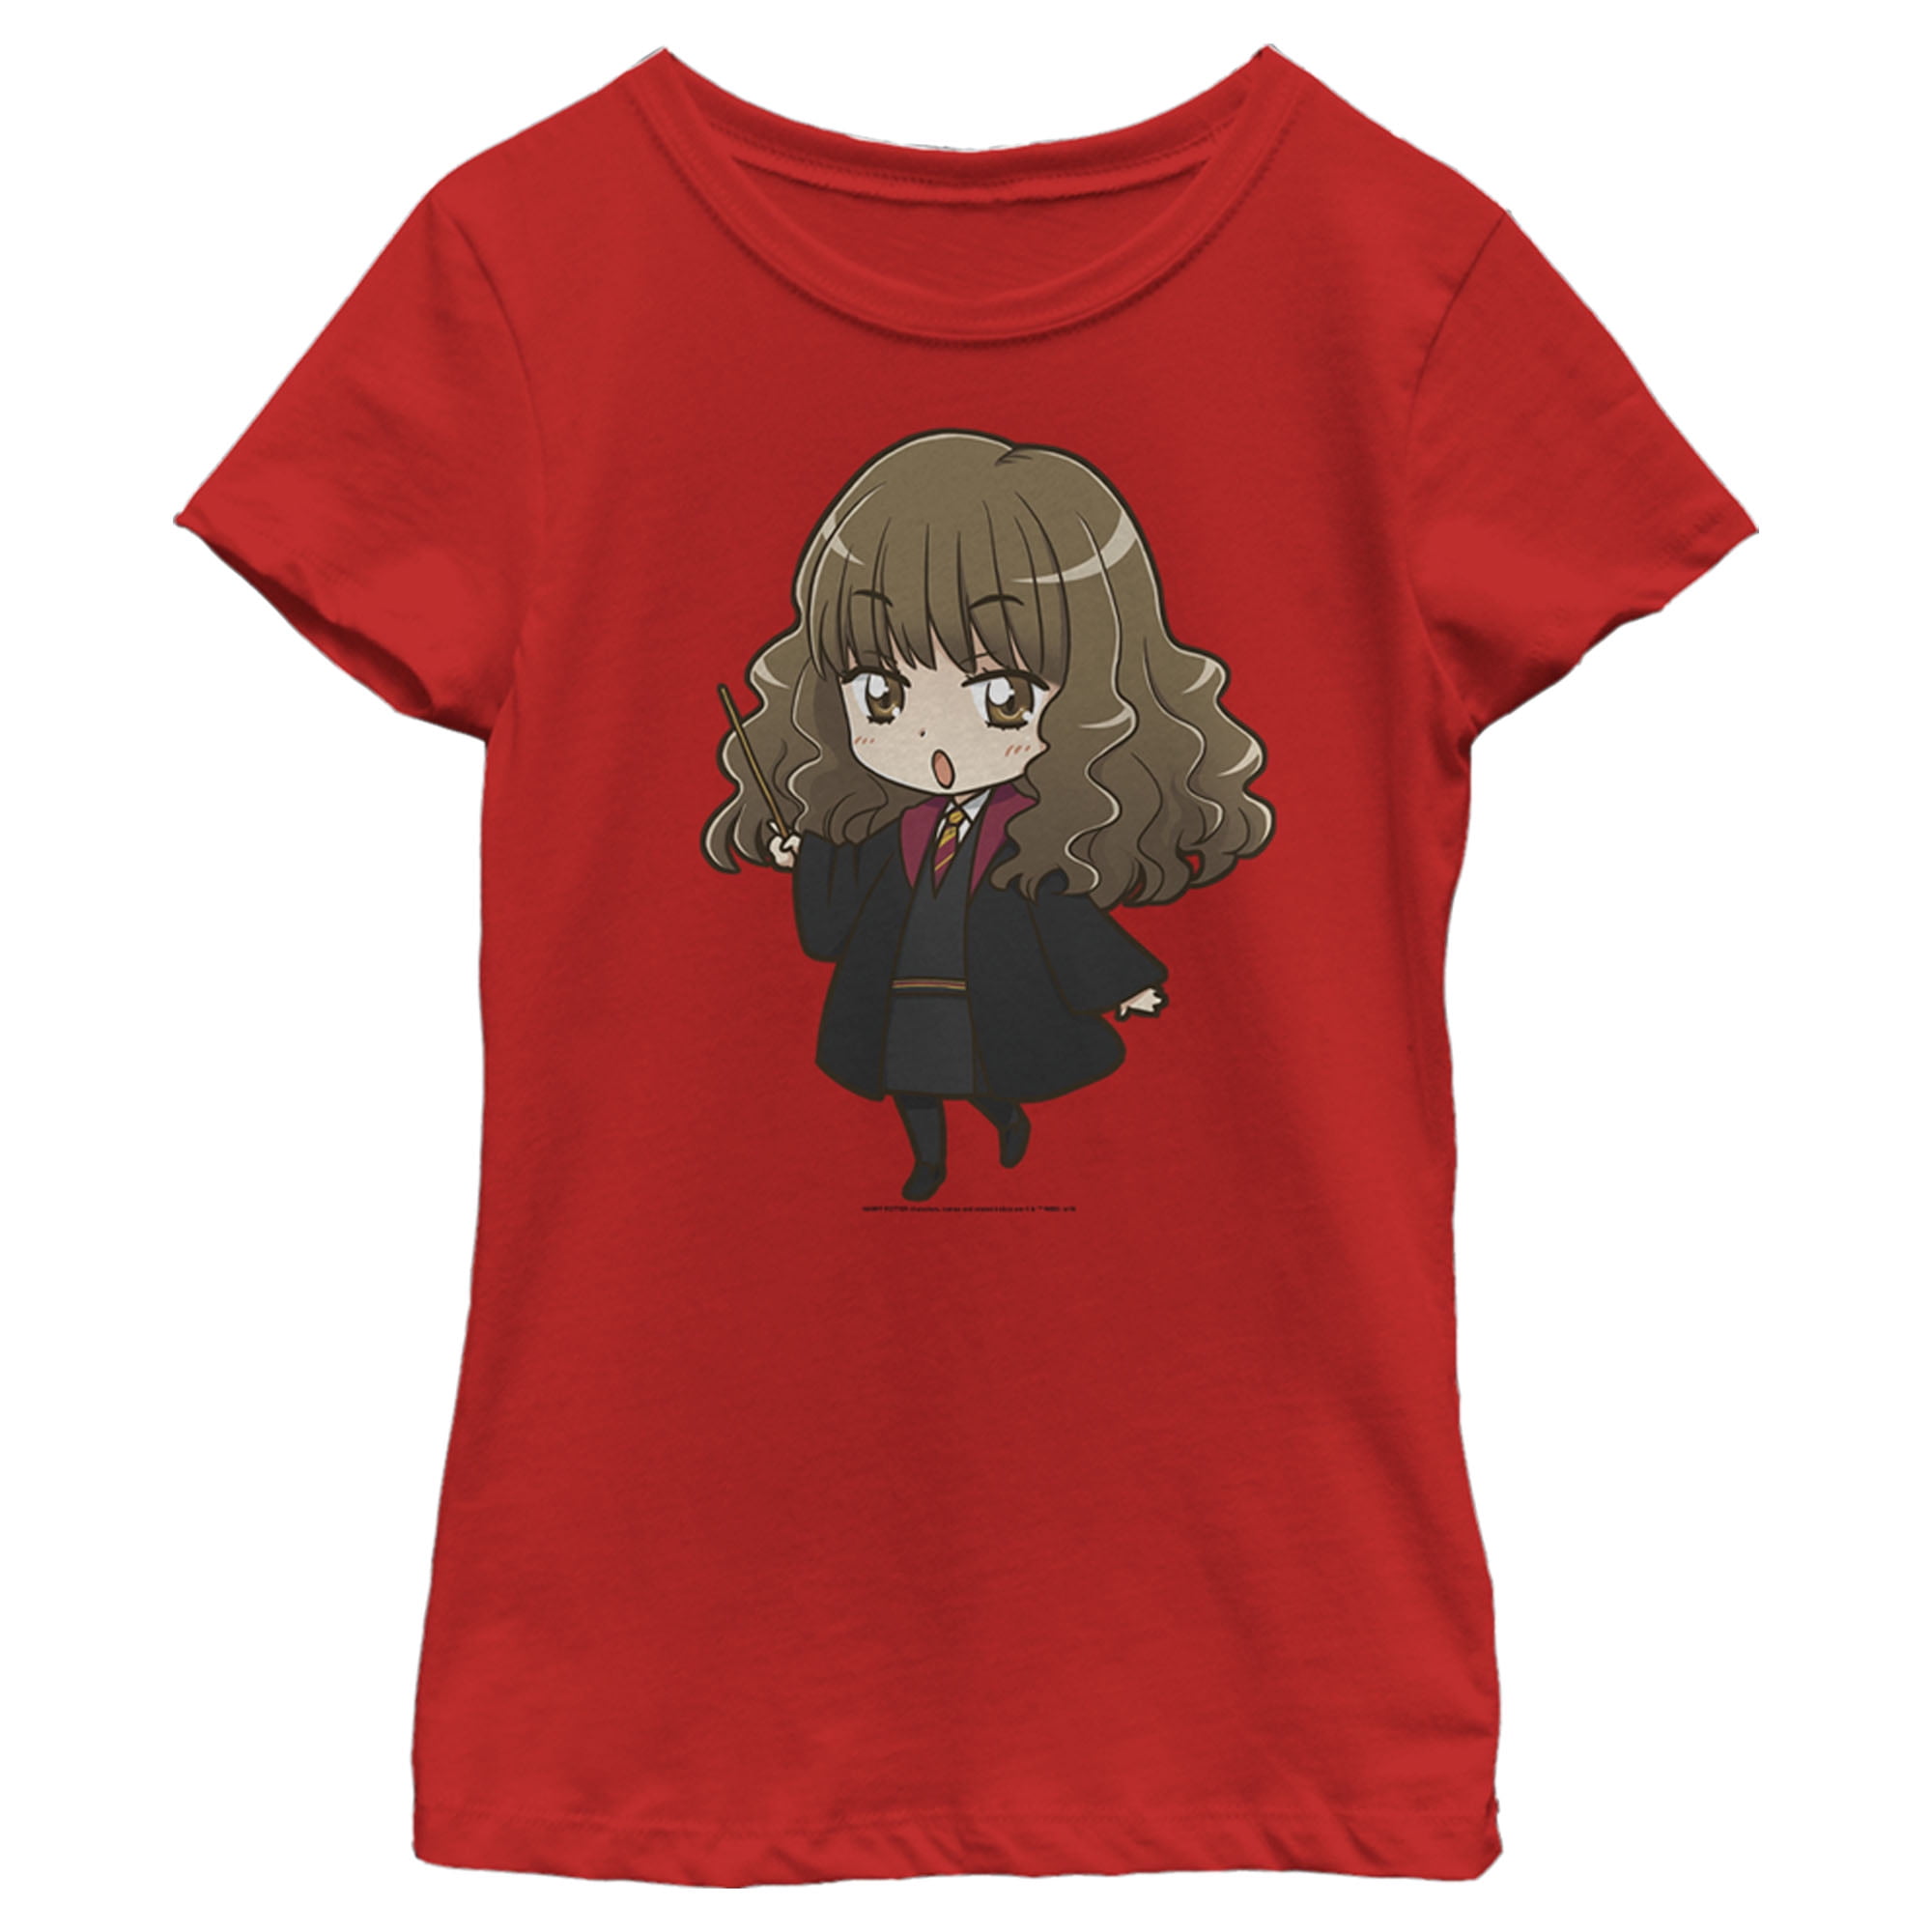 Girl's Harry Potter Hermione Cartoon Graphic Tee Red X Small